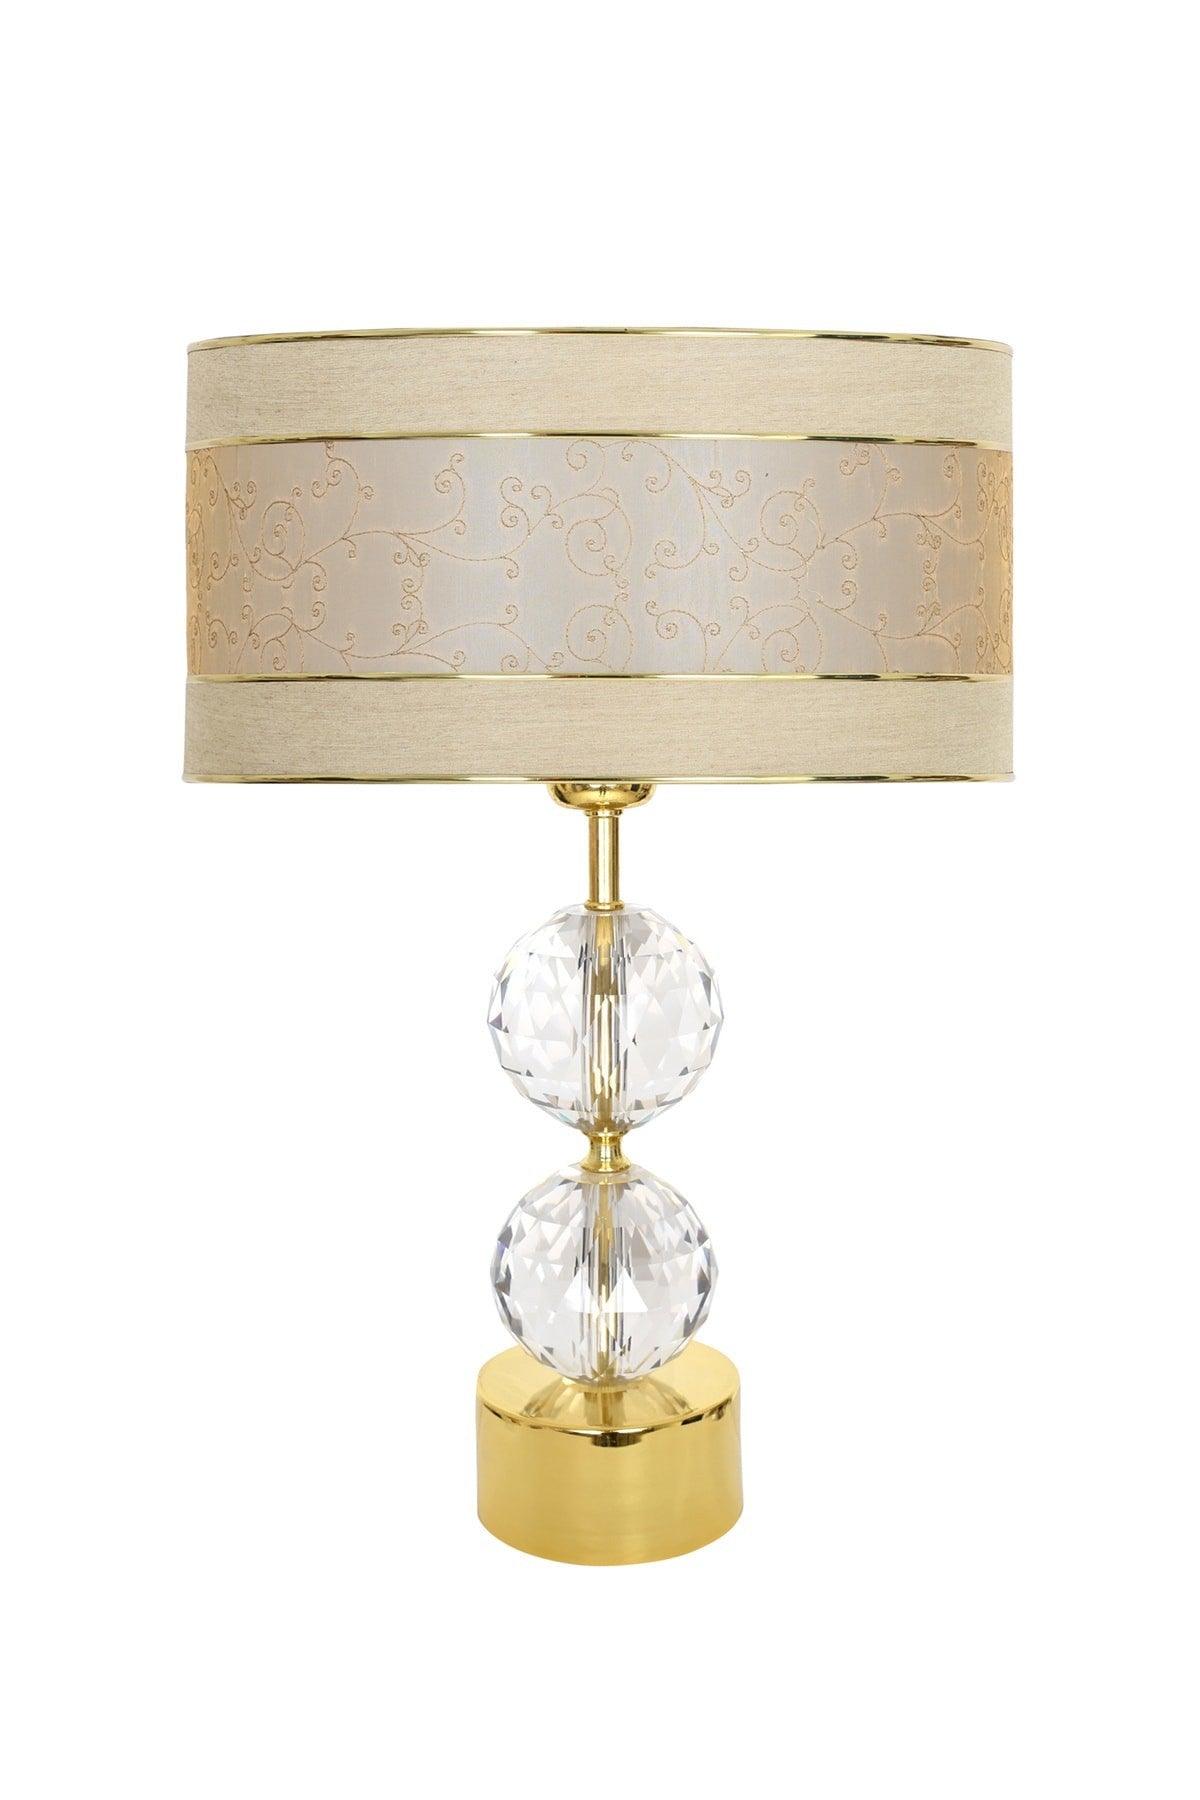 Gld-krs01 Gold Footed Crystal Lampshade - Gold Double Mataro - Swordslife